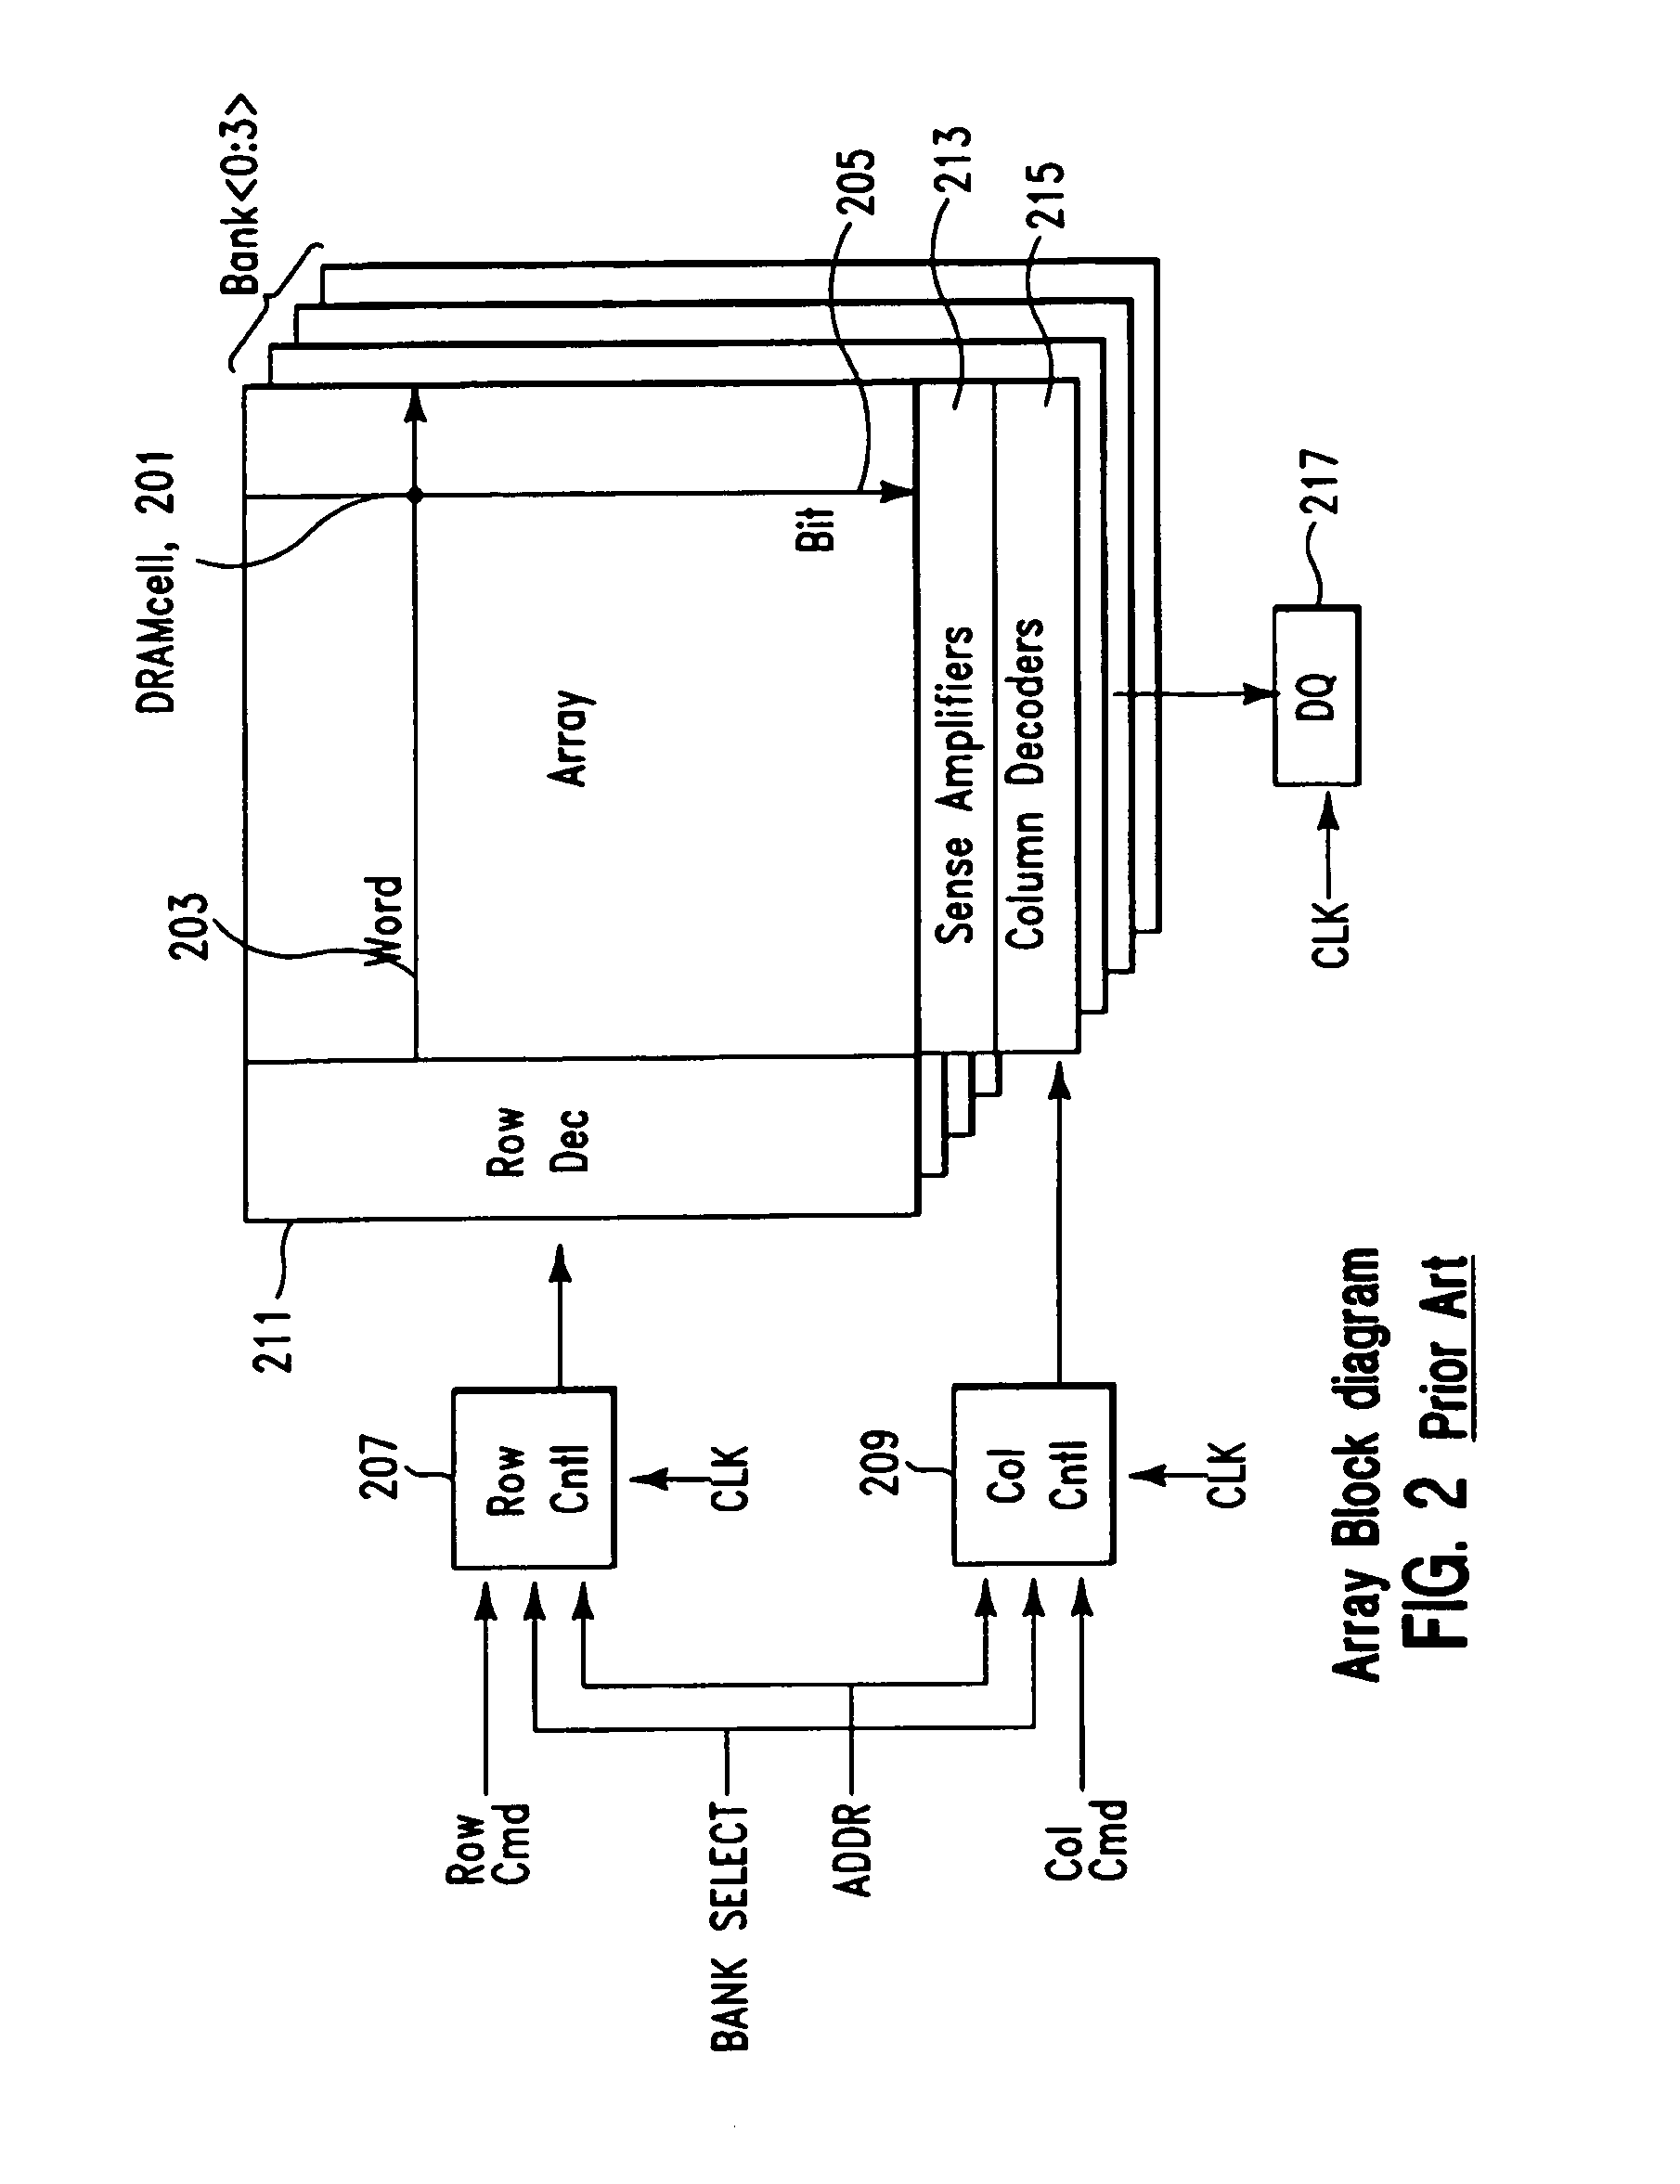 ECC based system and method for repairing failed memory elements